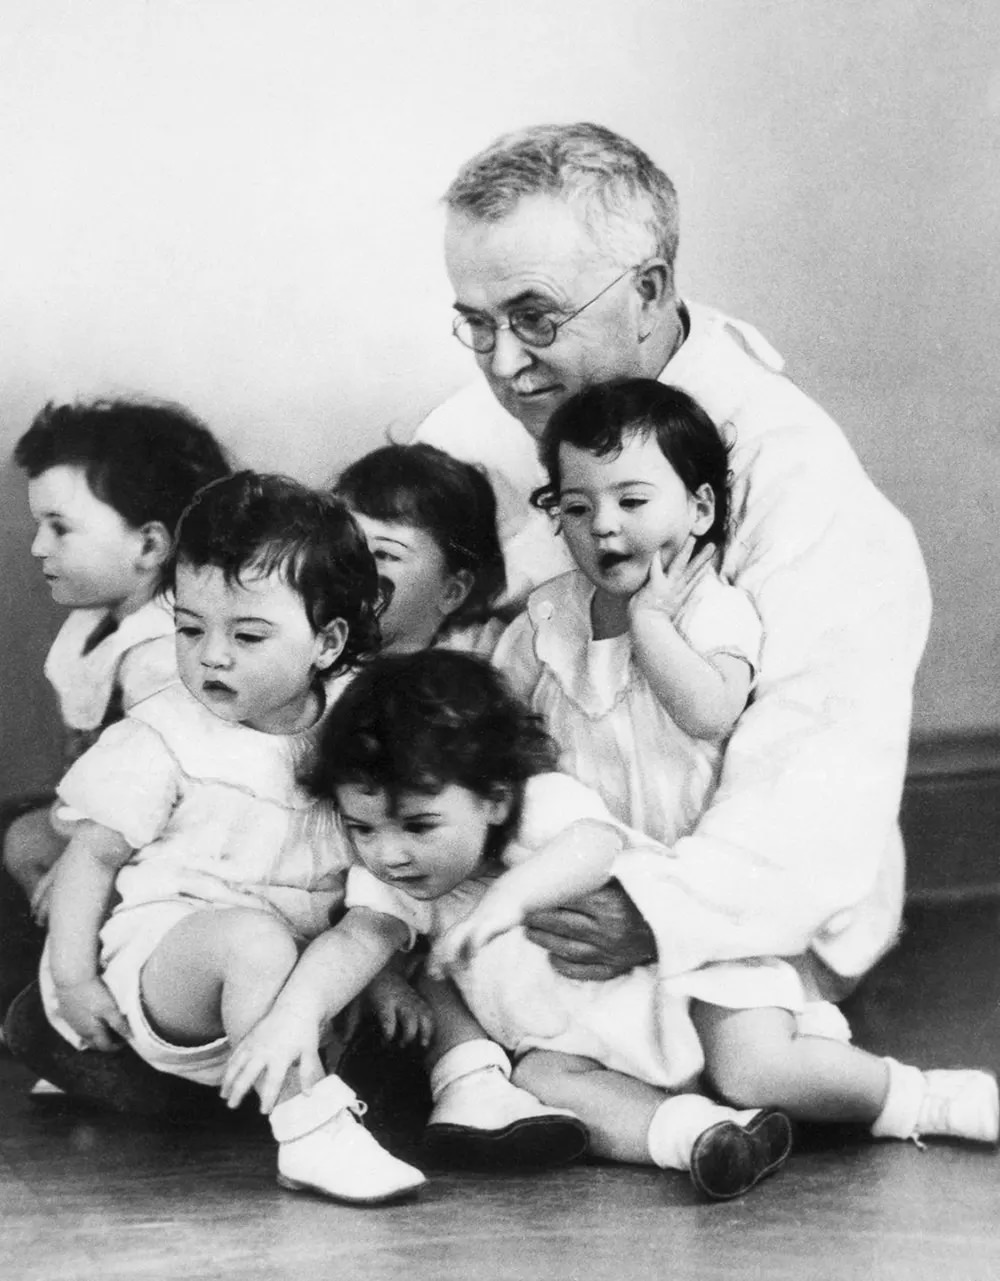 Delivering physician Dr. Allan R. Dafoe visits the quintuplets on their first birthdays, 1935.